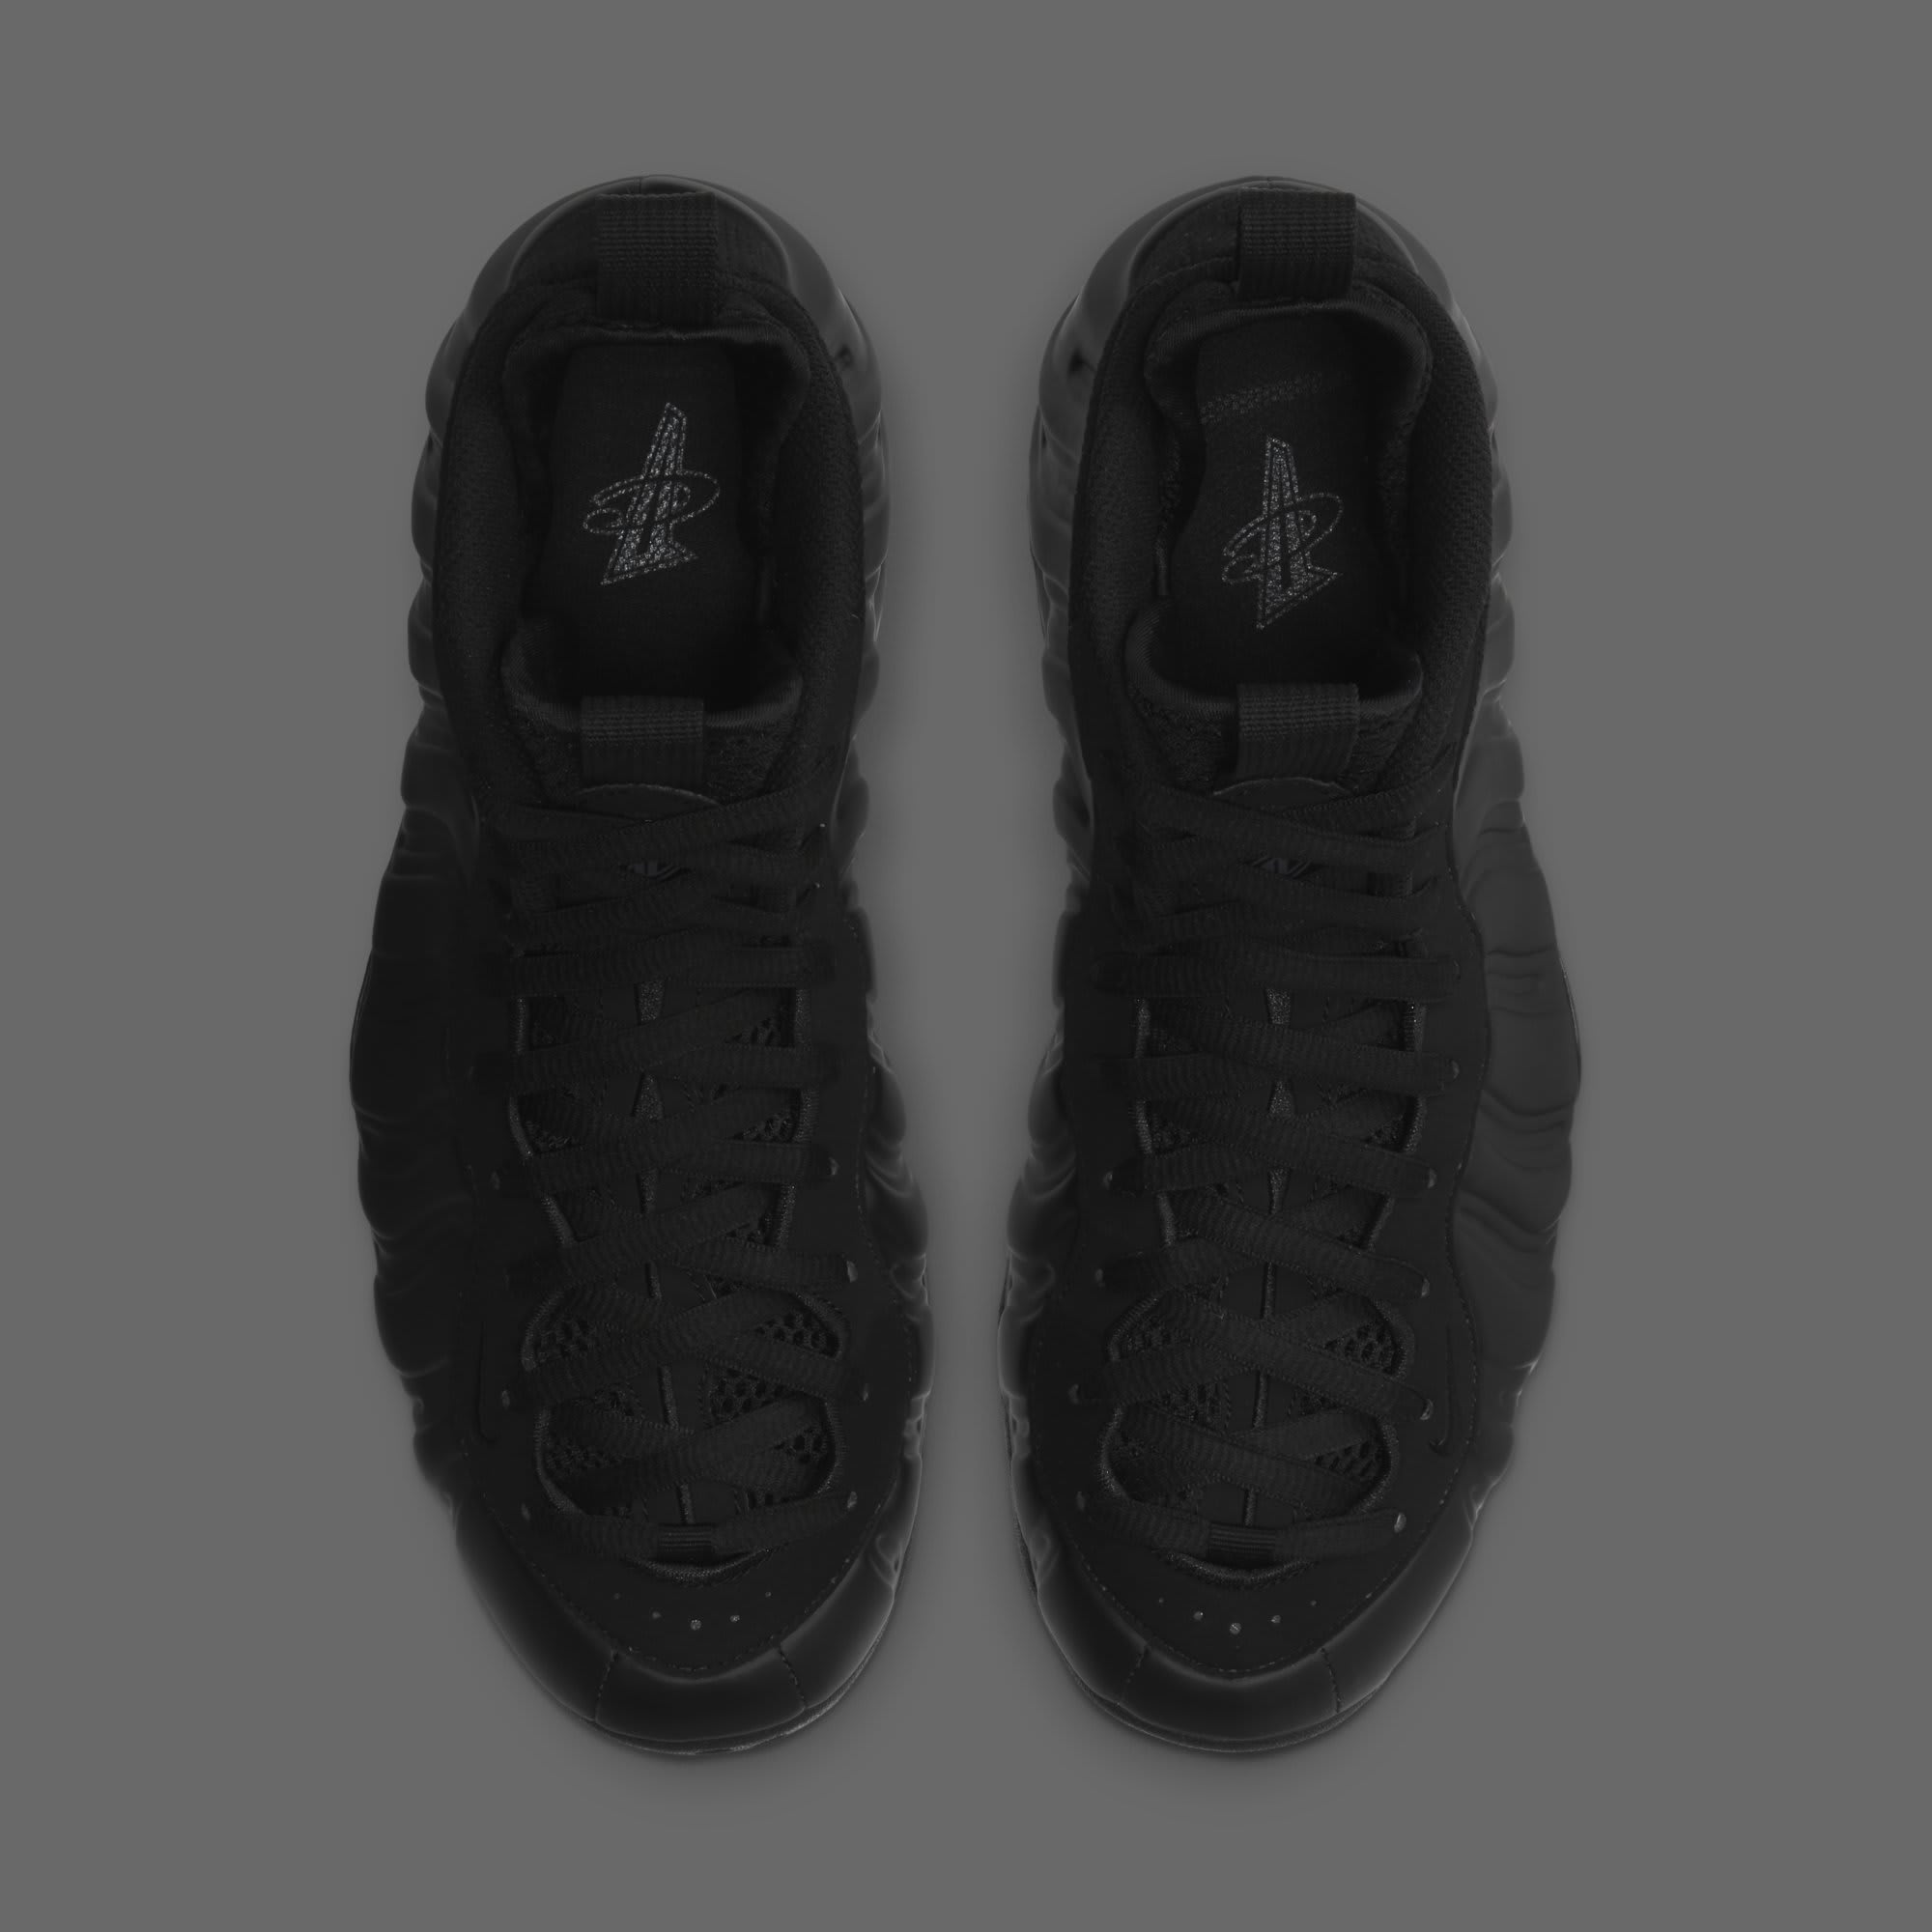 nike air foamposite one anthracite 2020